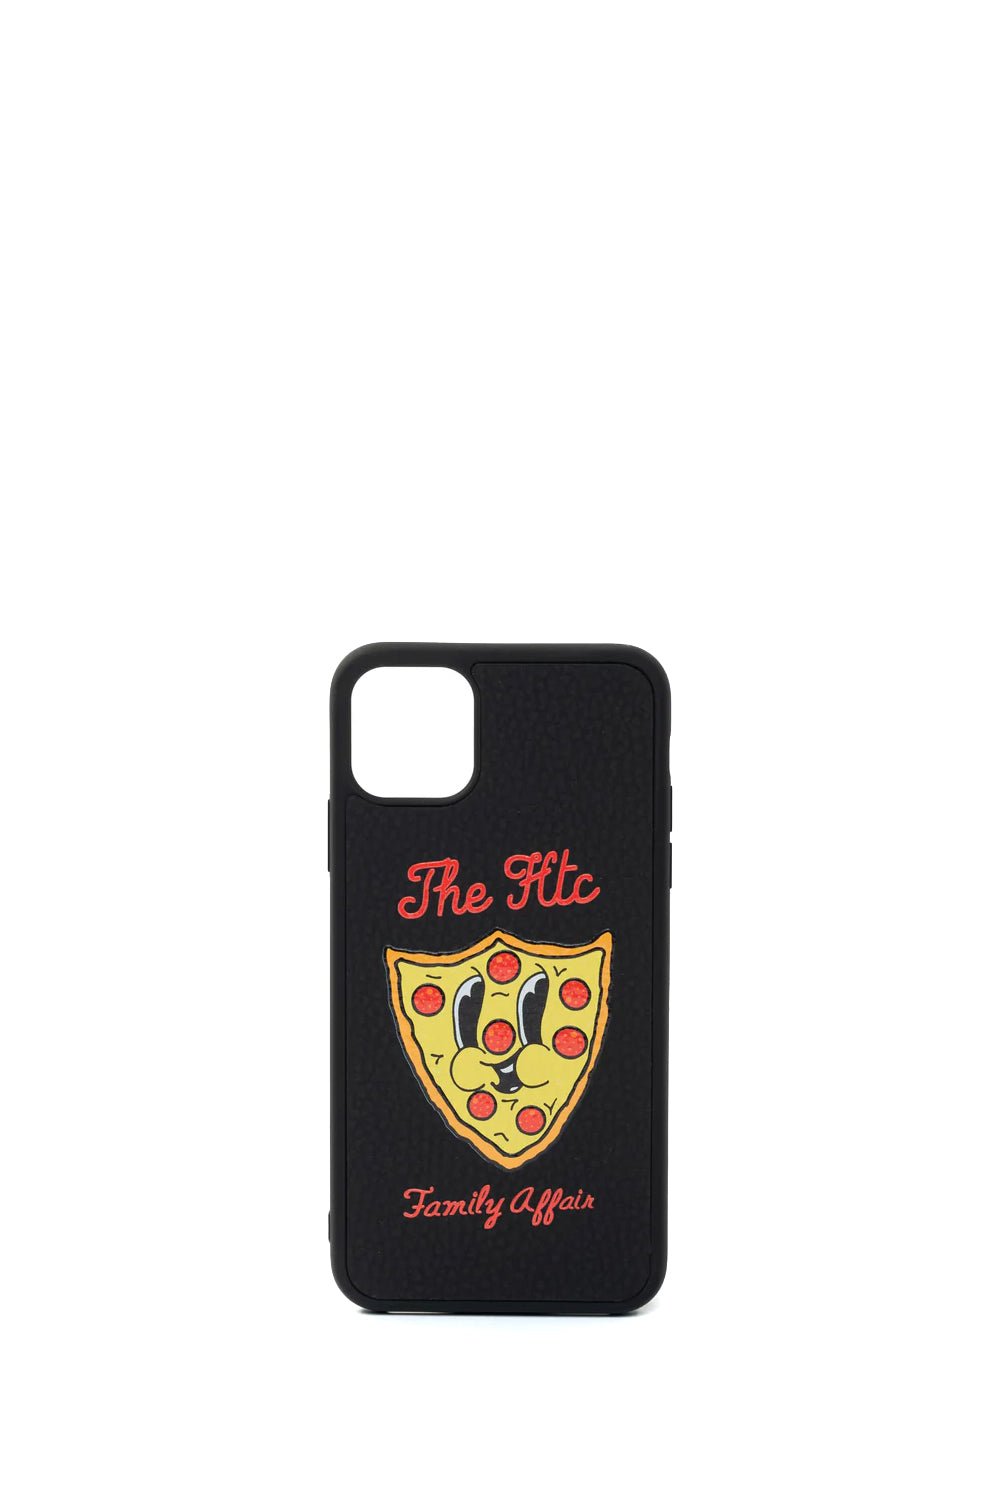 SLICETC COVER Iphone 11 Pro Max Limited Edition Iphone 11 pro max black cover with 'HTC FAMILY AFFAIR print. 100% leather. Made in Italy. HTC LOS ANGELES